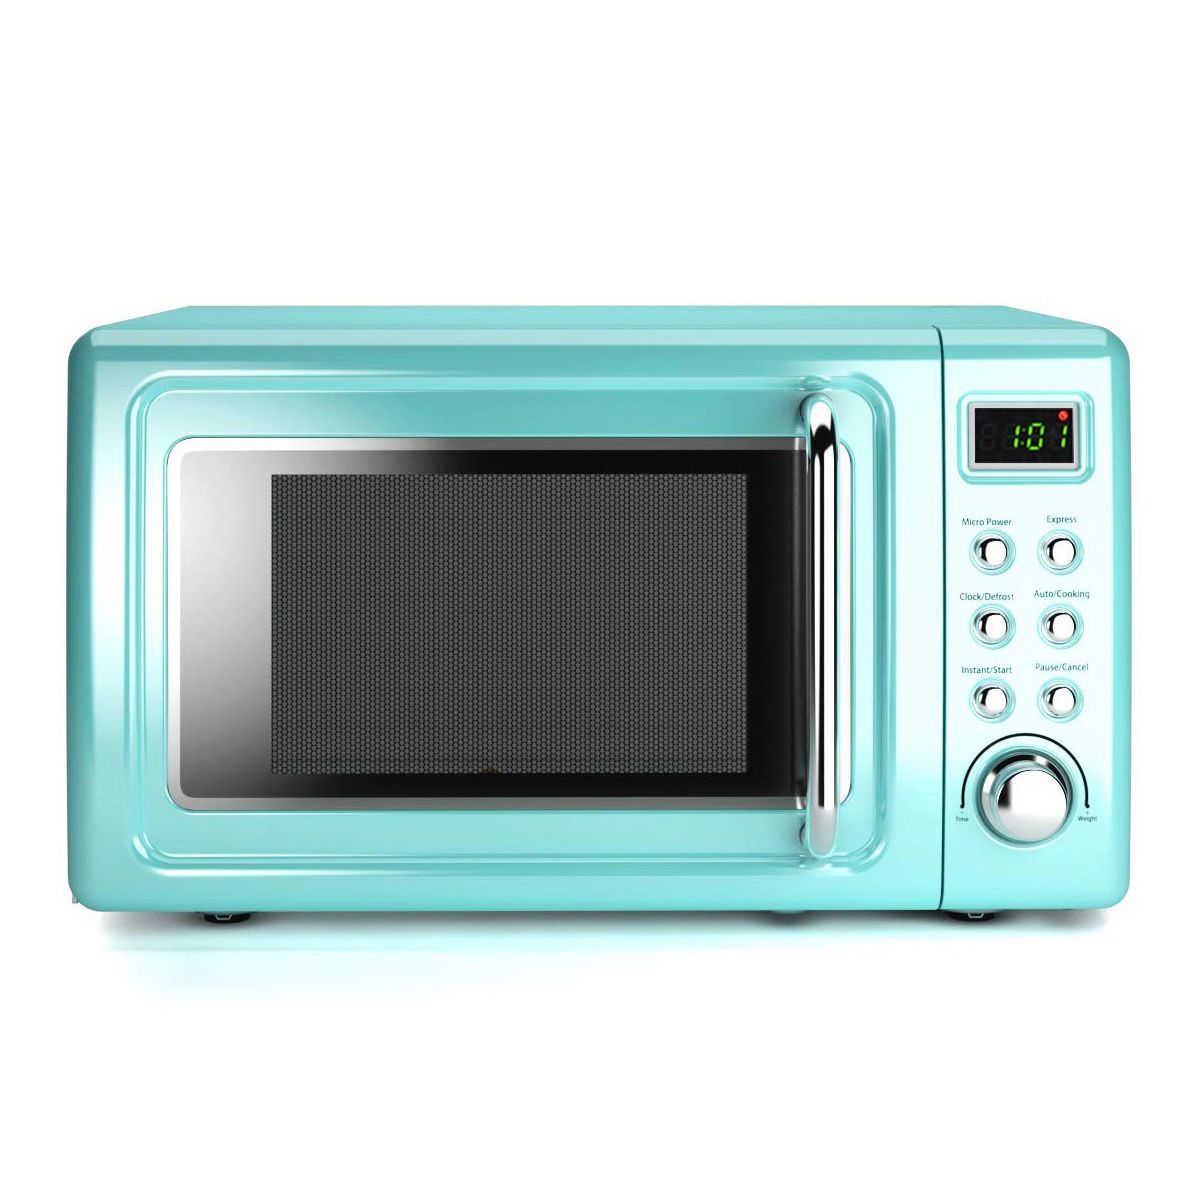 Costway 0.7Cu.ft Retro Countertop Microwave Oven 700W LED Display Glass Turntable Green/Black/Ros... | Target